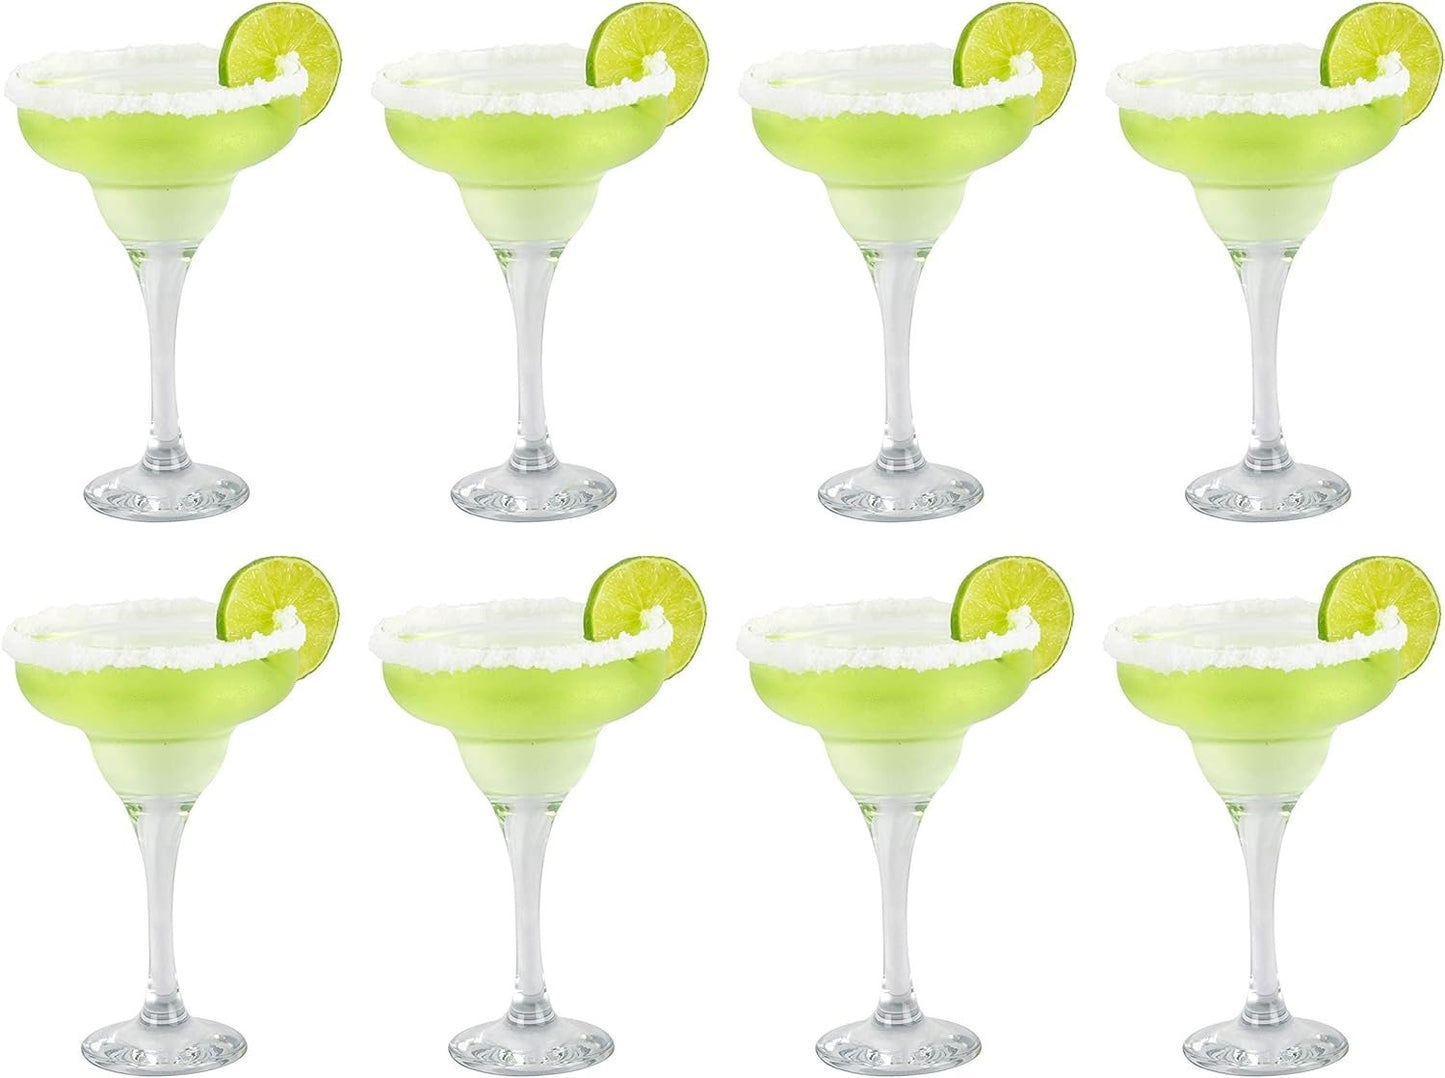 epure Firenze Collection 8 Piece Margarita Glass Set - Classic For Drinking Margaritas, Pina Coladas, Daiquiris, and Other Cocktails (Margarita (10 oz))